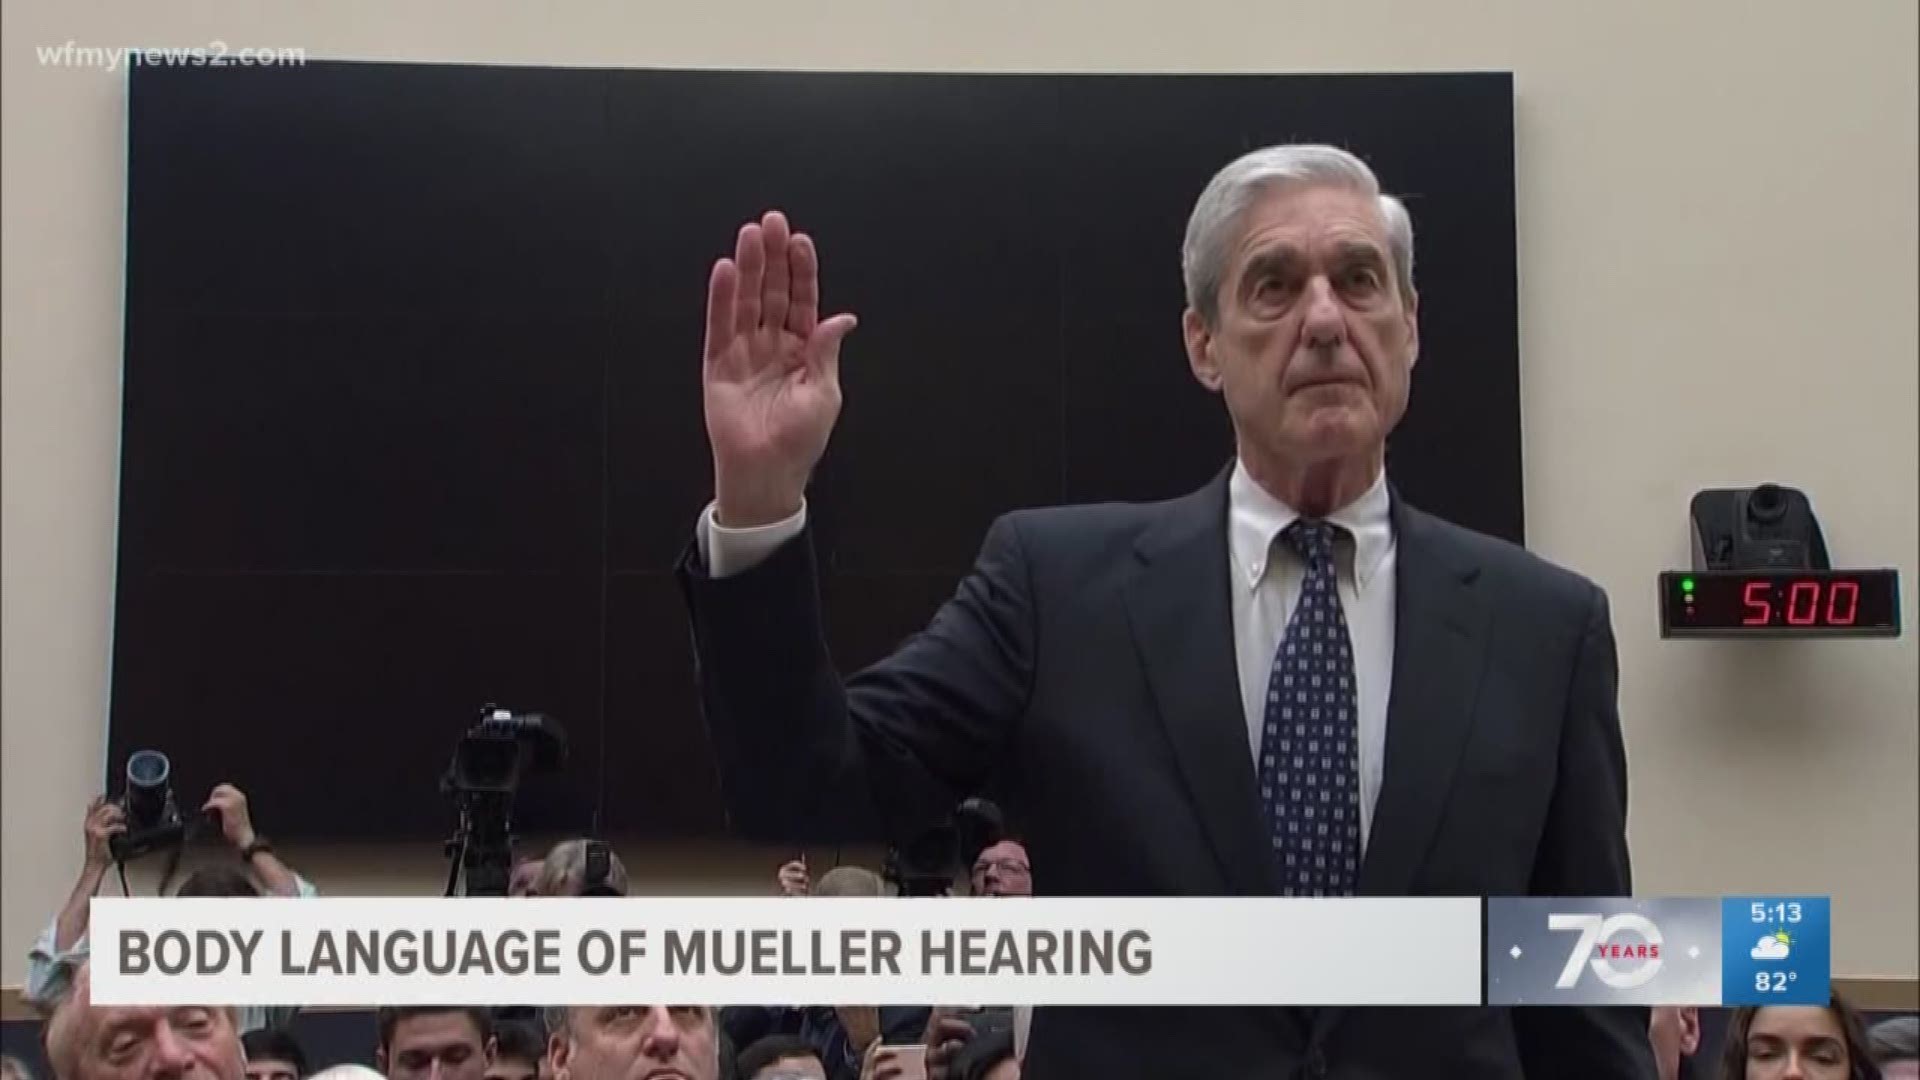 All eyes have been on Robert Mueller's testimony before Congress Wednesday. 
You've heard what he's saying, but we want to take a closer look at what he's not saying. Blanca Cobb, body language expert, breaks down the Mueller's silent messages.